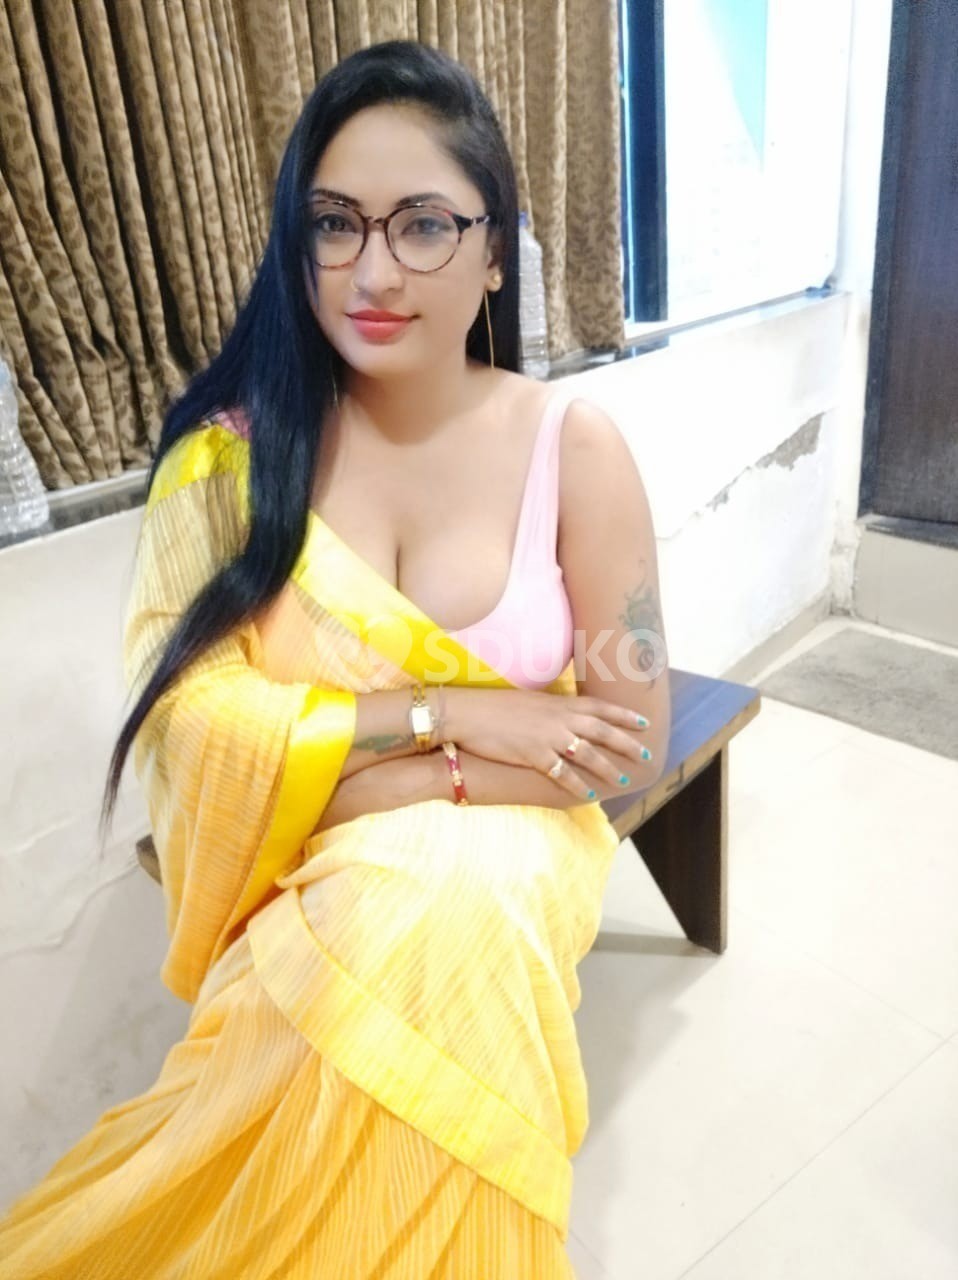 Kavya sharma LOW PRICE🔸✅ SERVICE AVAILABLE 100% SAFE AND SECURE UNLIMITED ENJOY HOT COLLEGE GIRL HOUSEWIFE AUNTIE